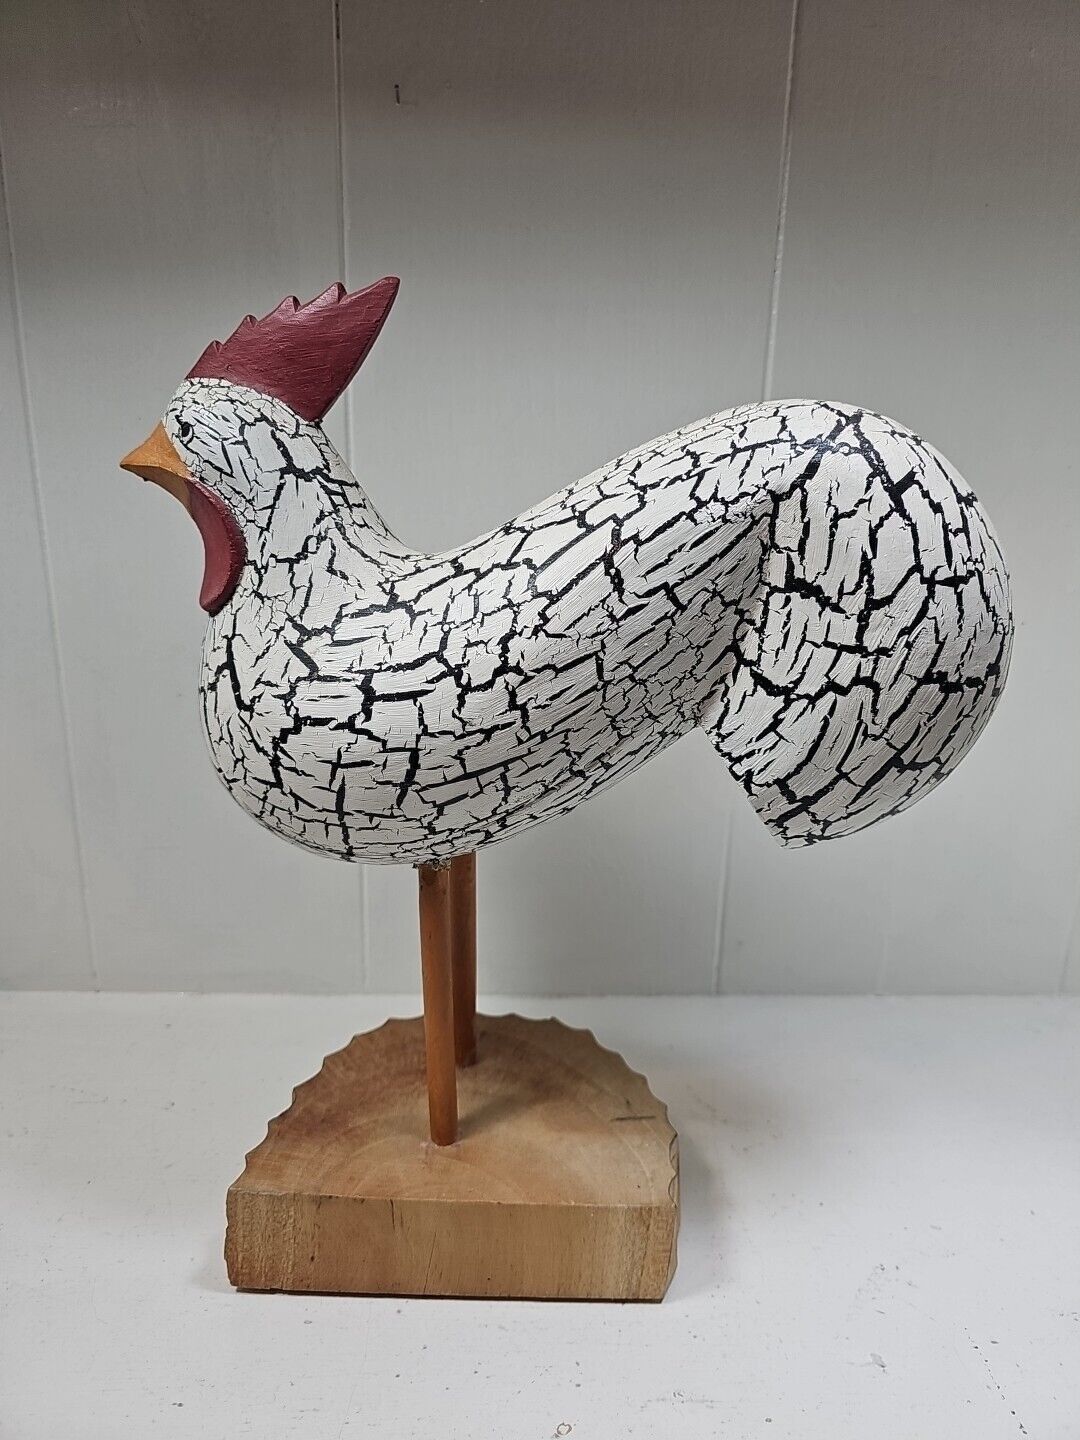 Vtg Handcrafted Wooden Rooster Country Decor White Black 13”T X 12”L Wood Base